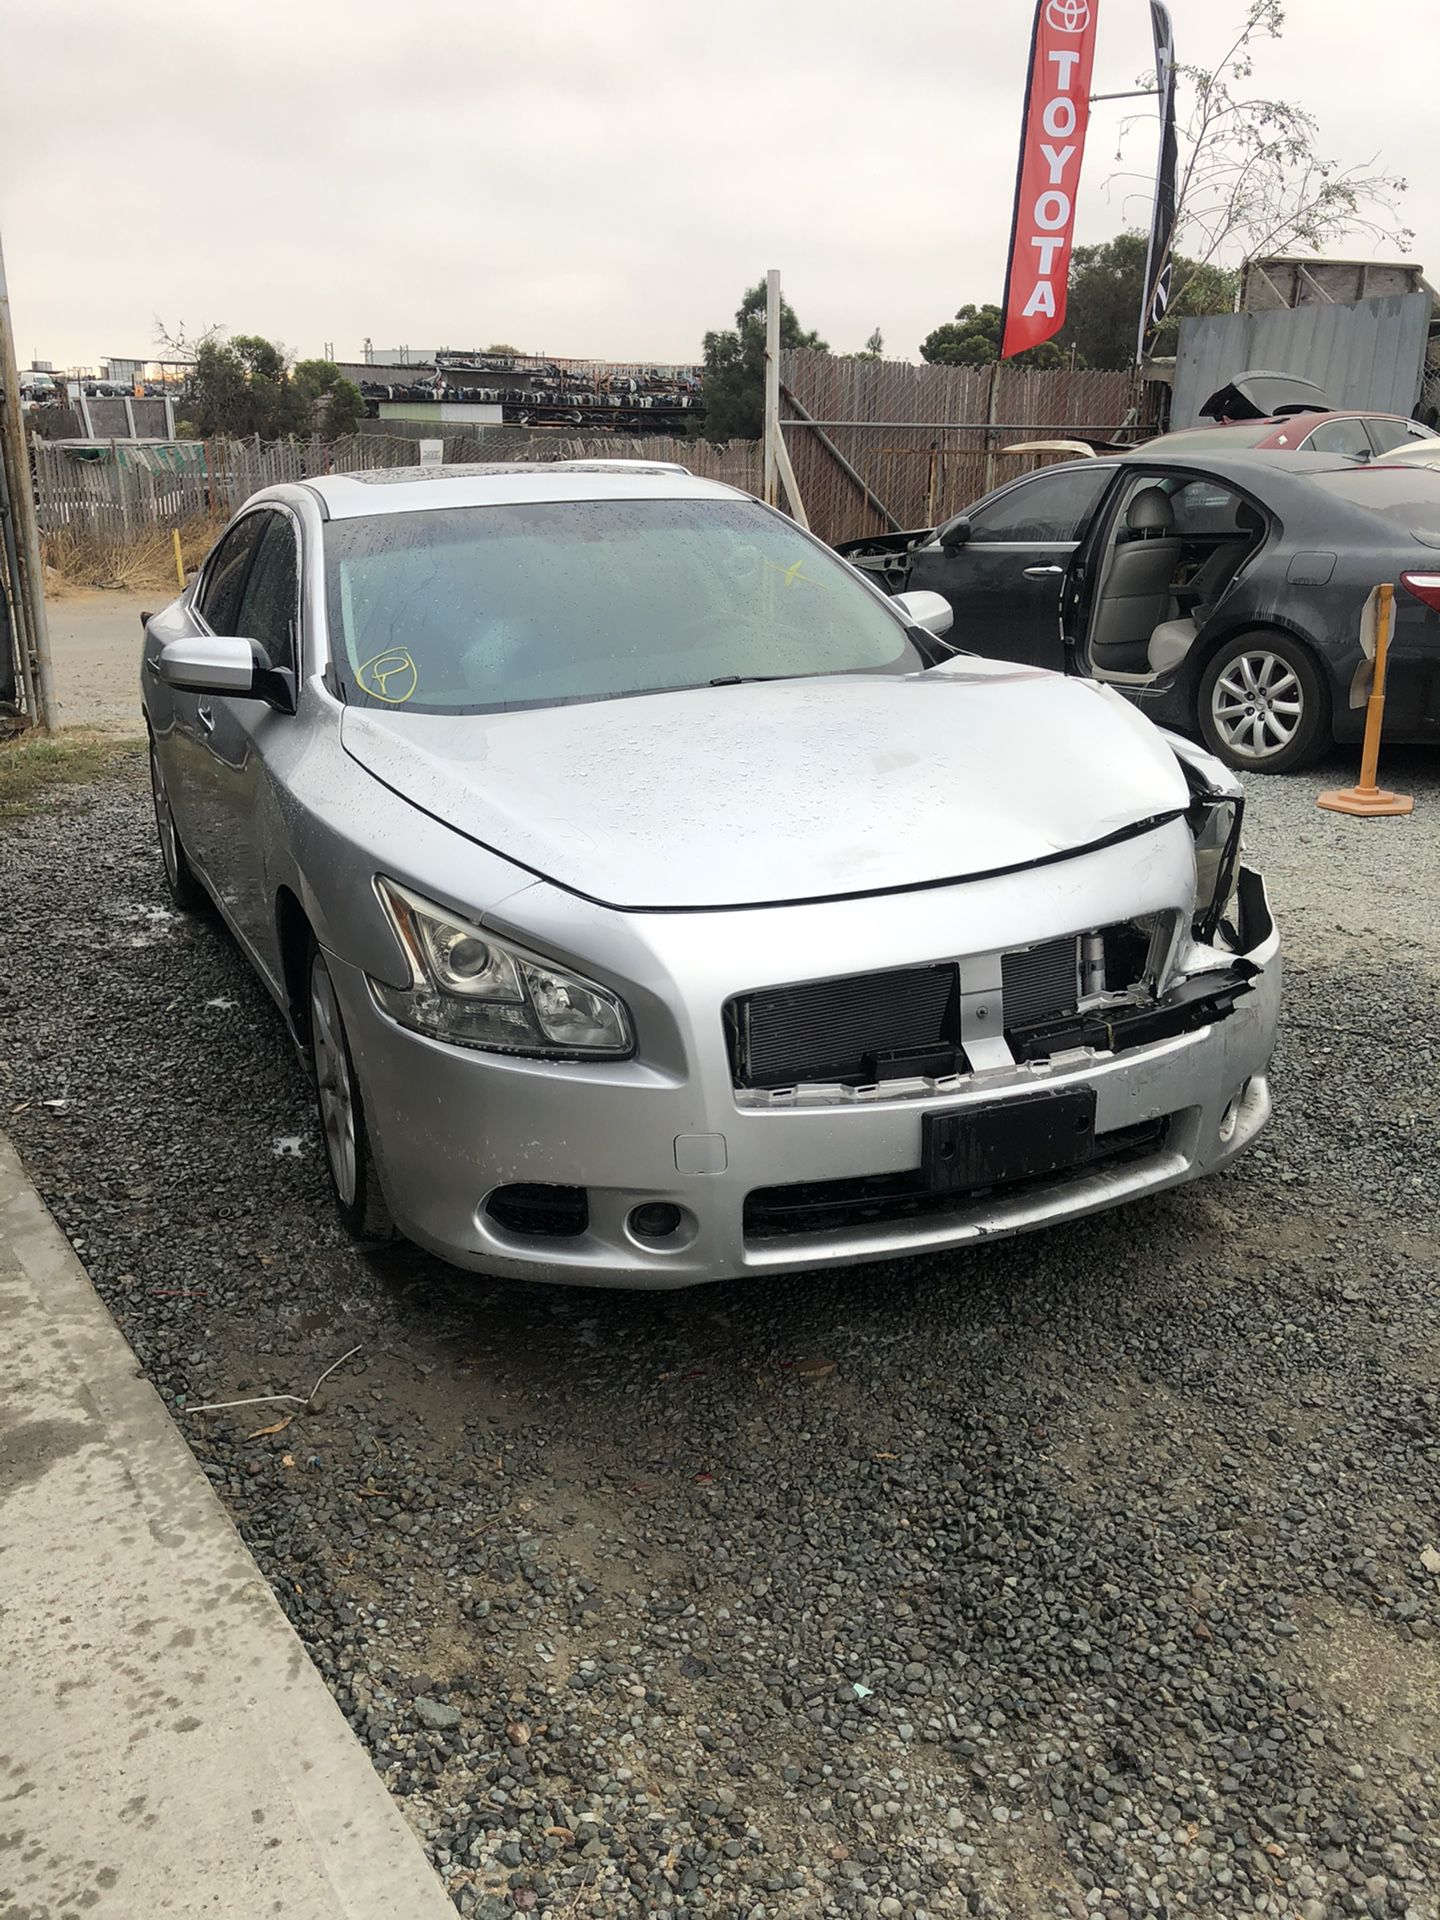 2009 Nissan Maxima for part in auto parts